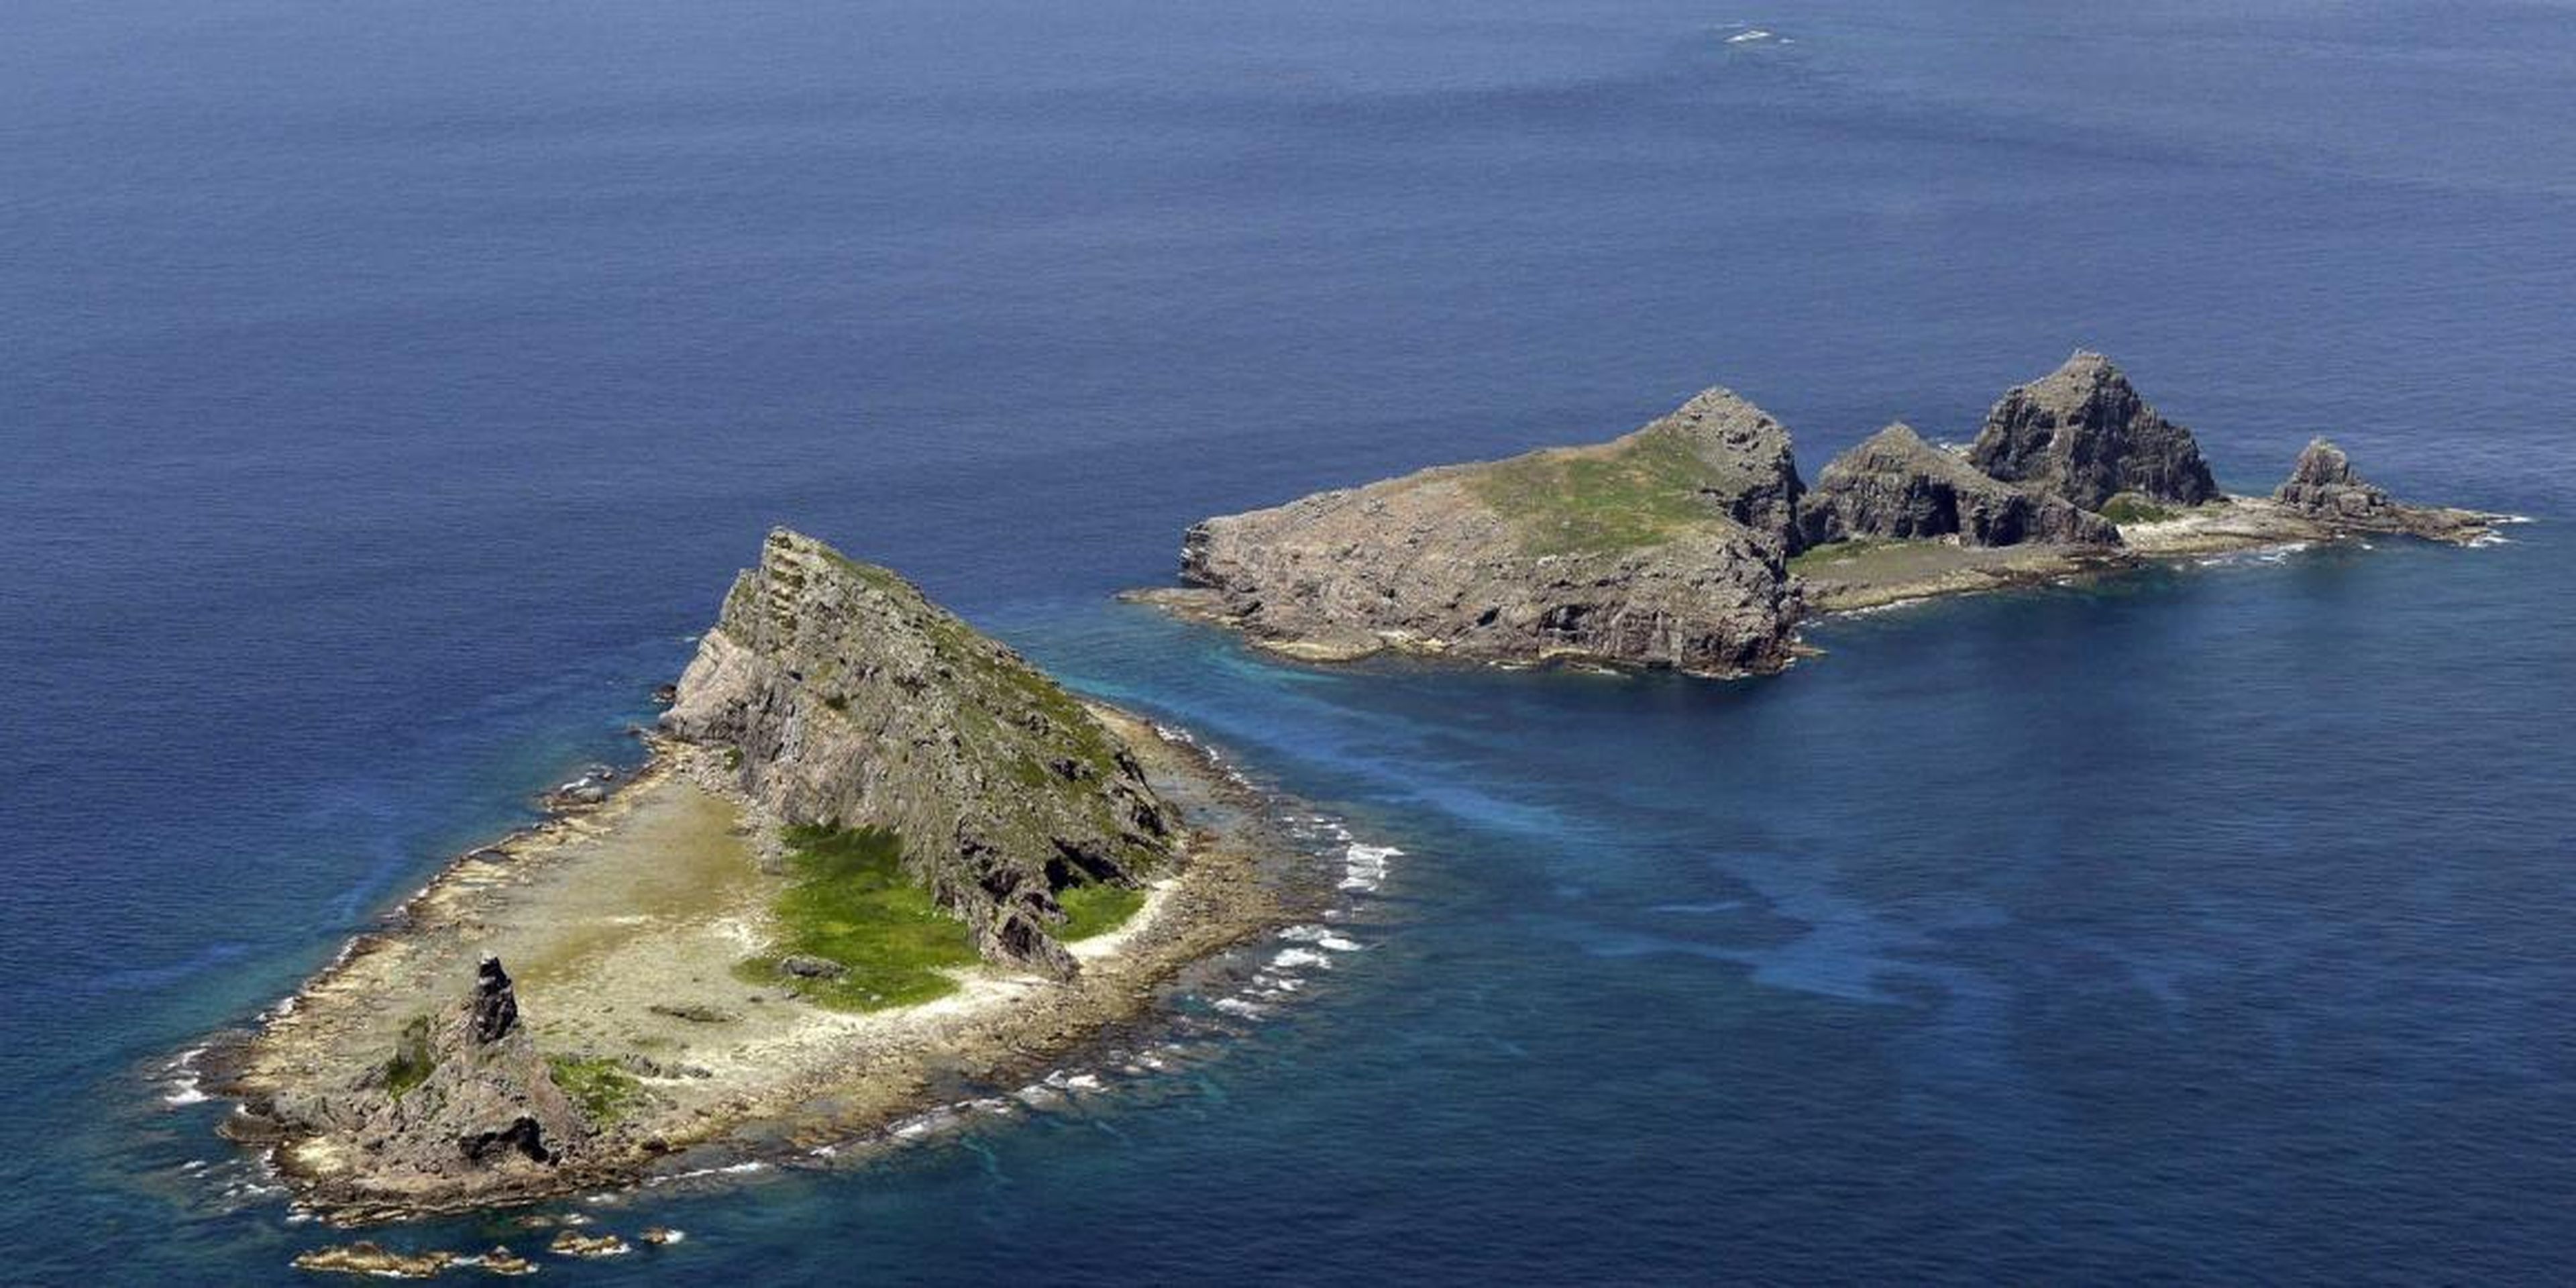 China and Japan's maritime dispute in 2010 was over this group of islands, known in Japan as Senkaku and in China as Diaoyu.